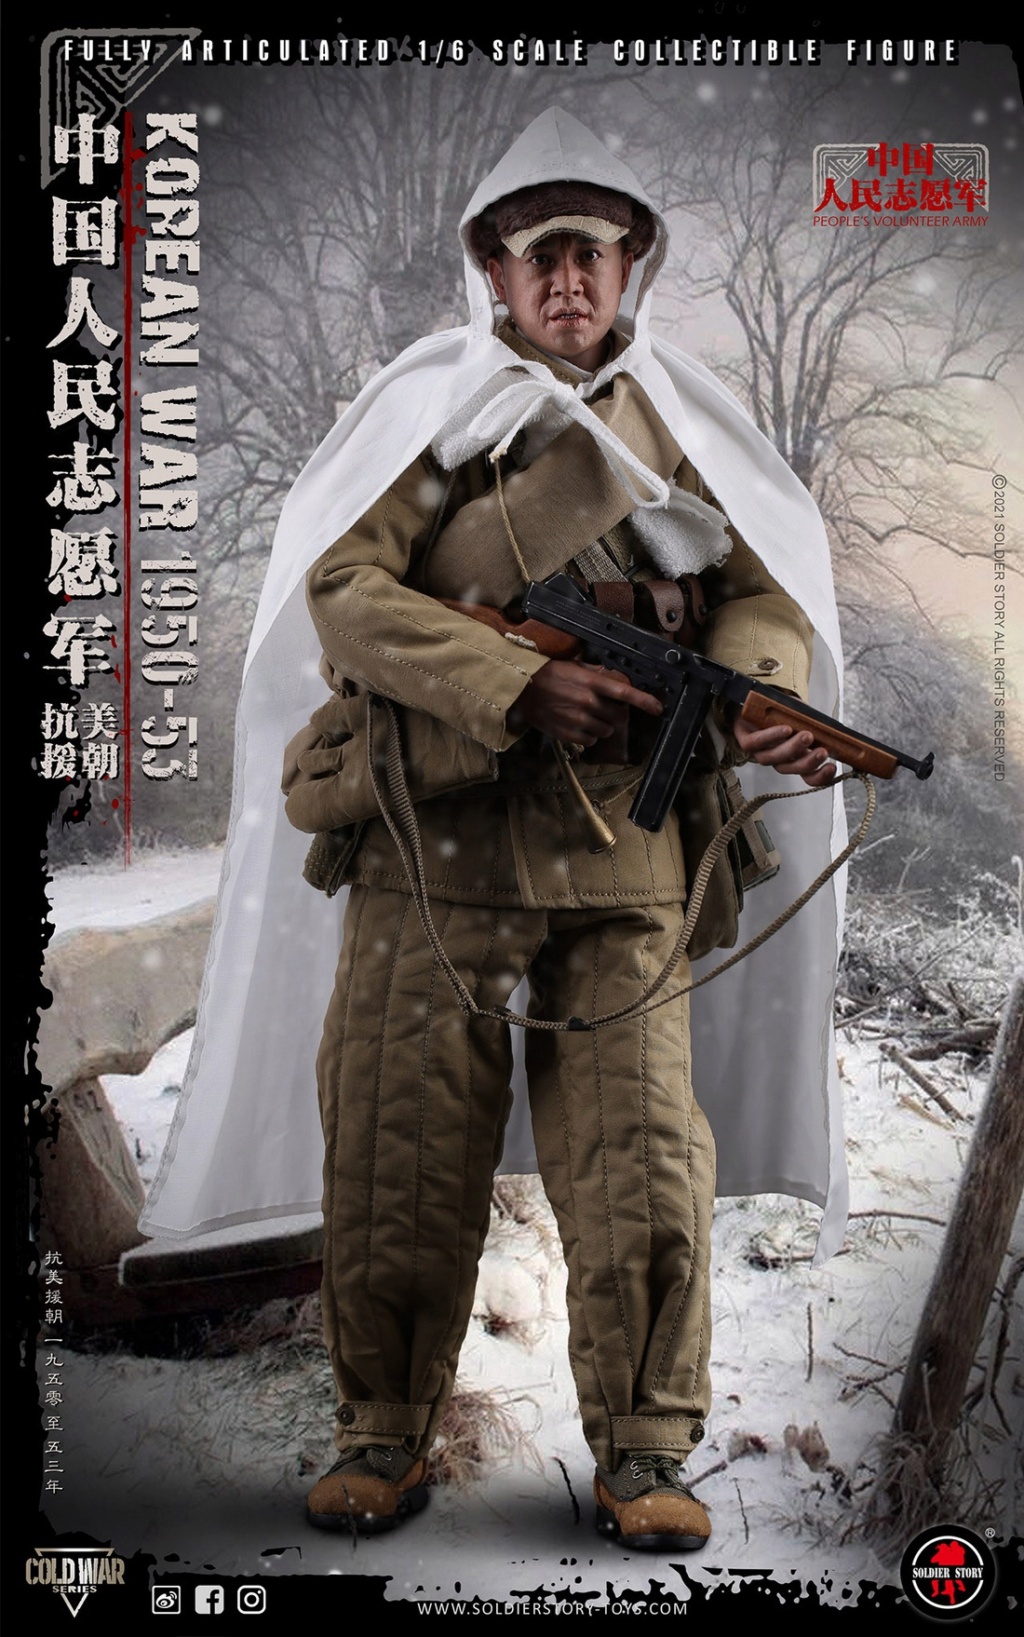 Soldierstory - NEW PRODUCT: SOLDIER STORY: 1/6 Chinese People’s Volunteers 1950-53 Collectible Action Figure (#SS-124) 72606a10